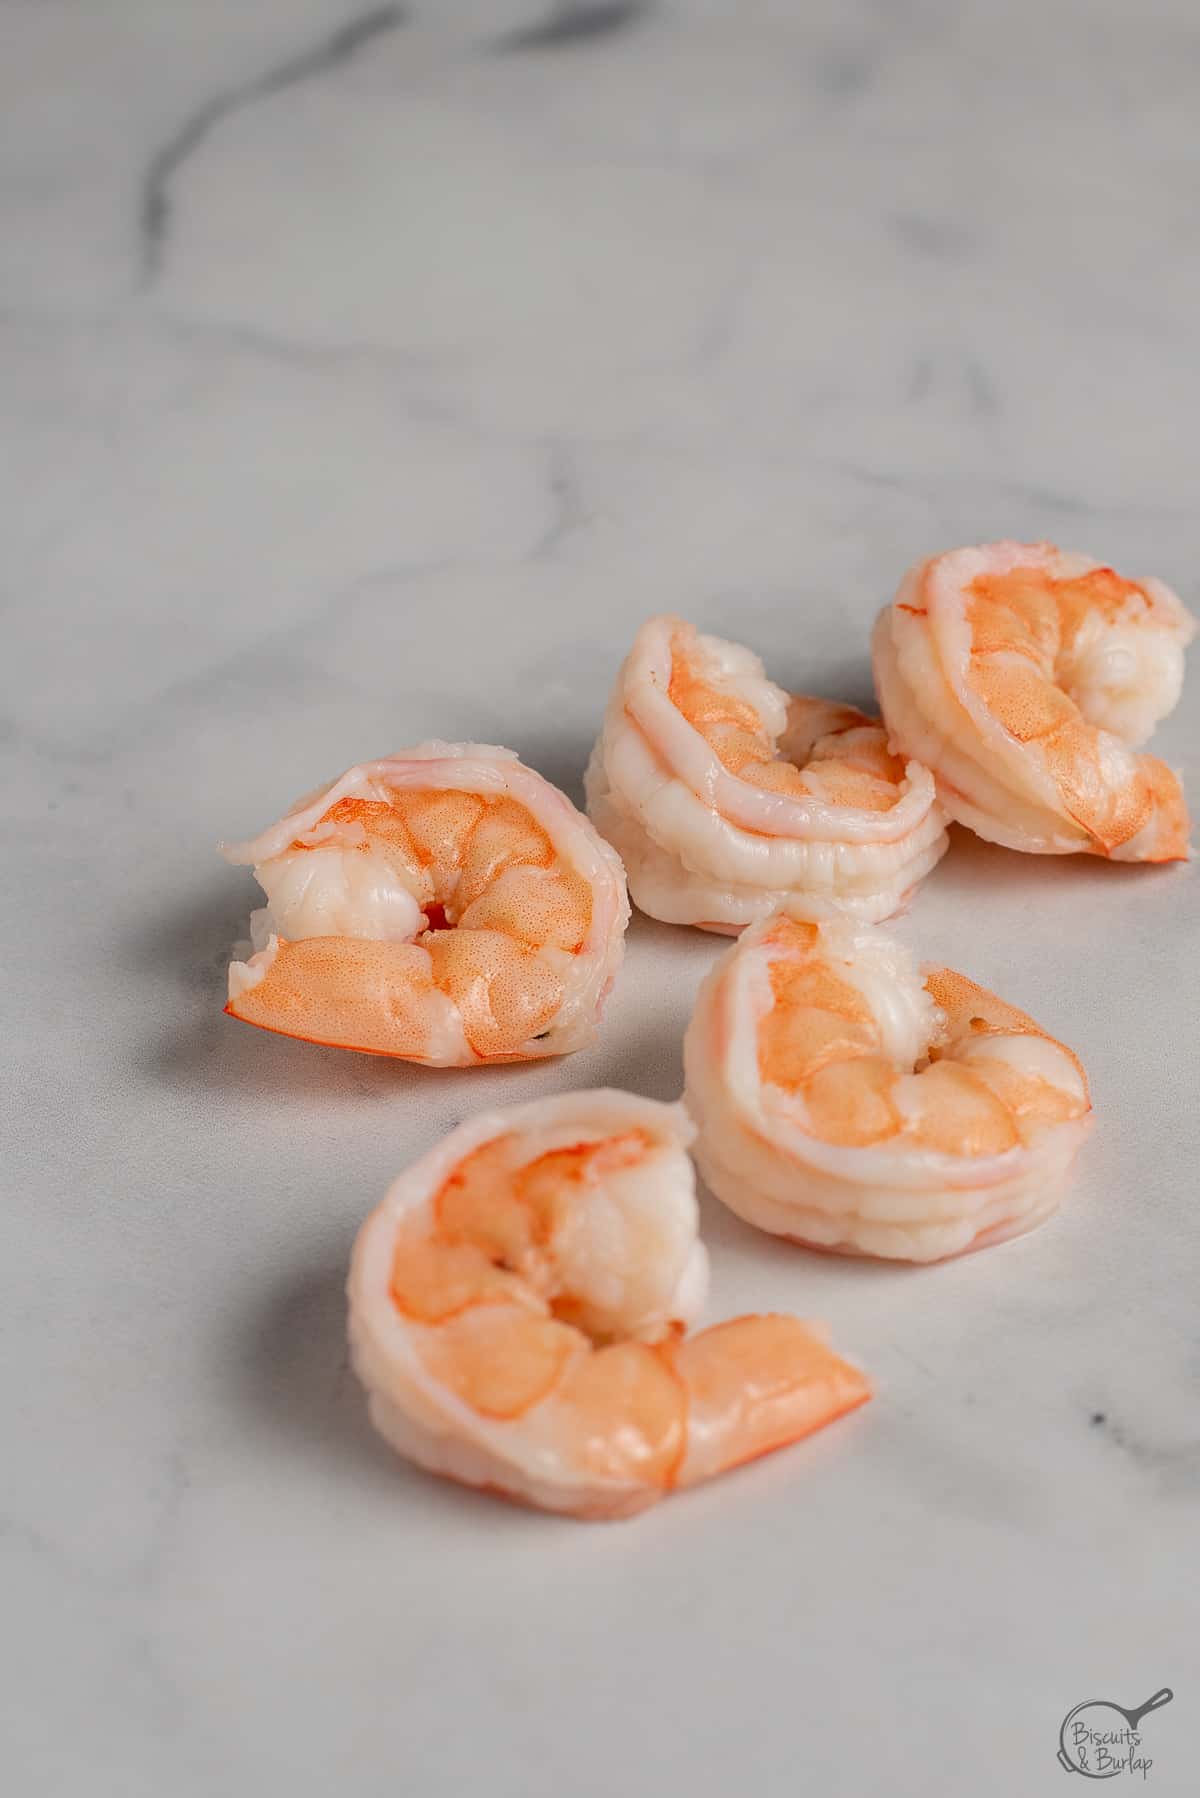 completely deveined and peeled shrimp. 